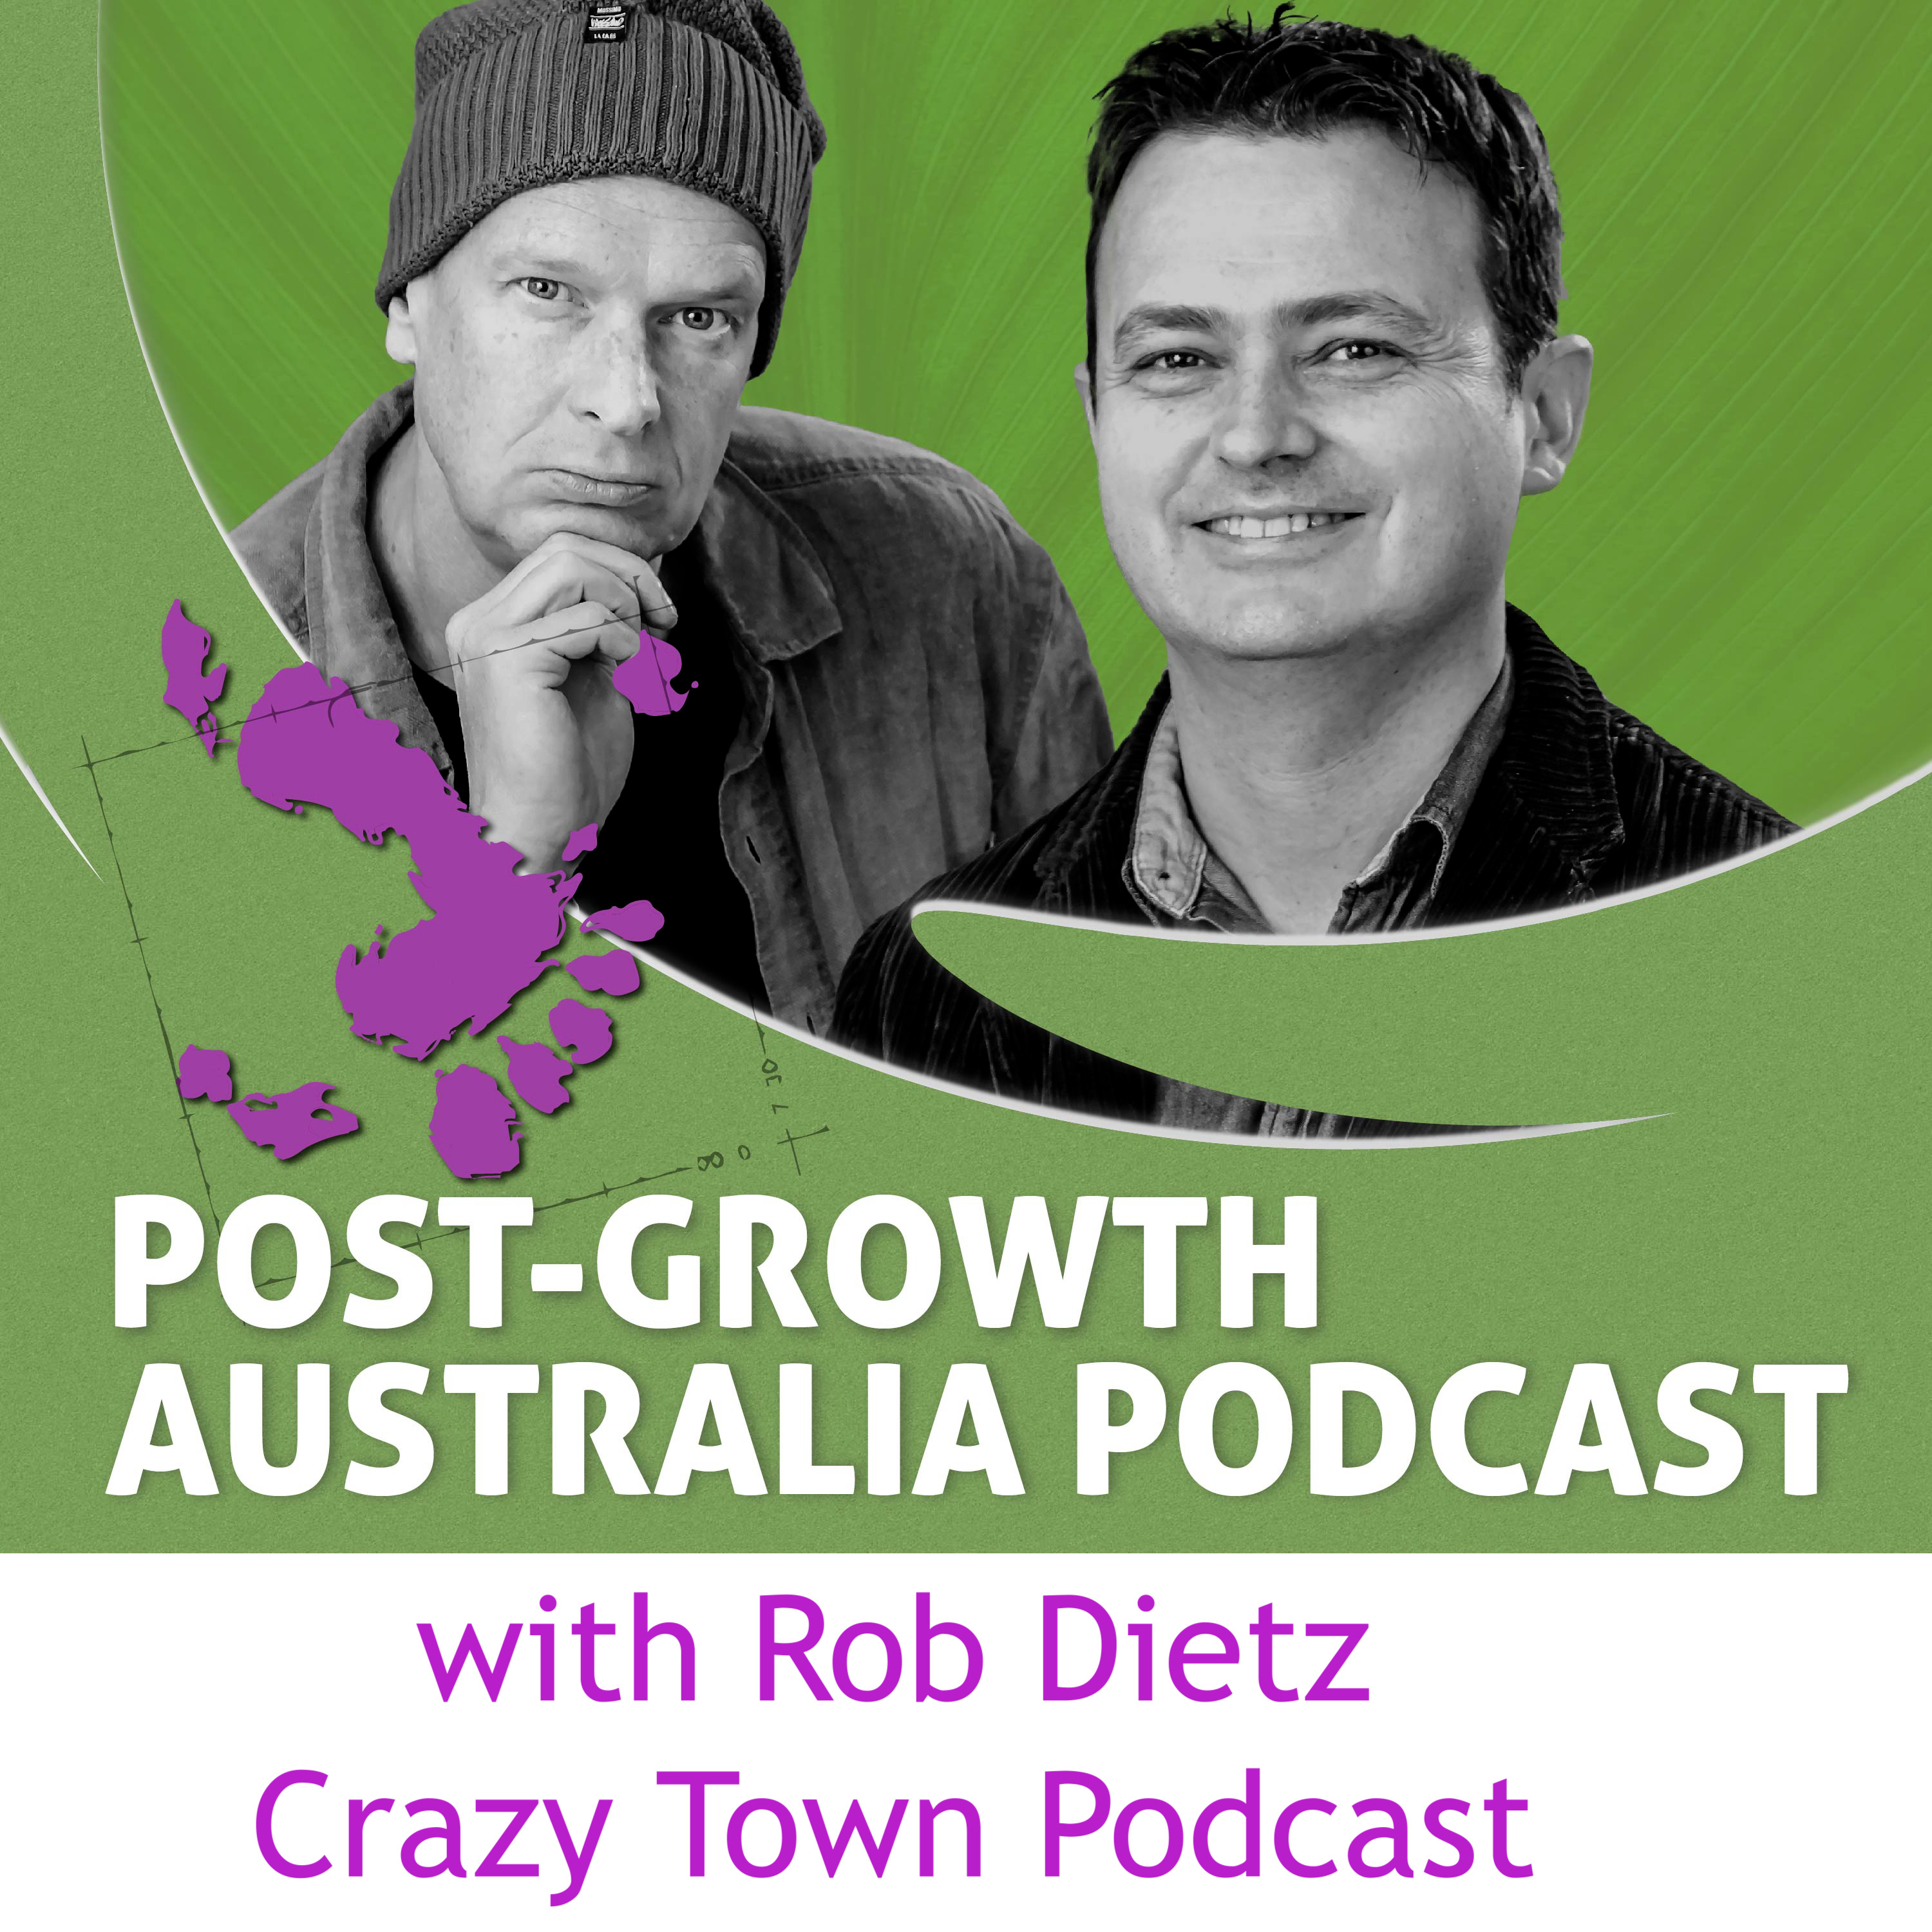 Let’s Get Crazy with Rob Dietz from Crazy Town Podcast